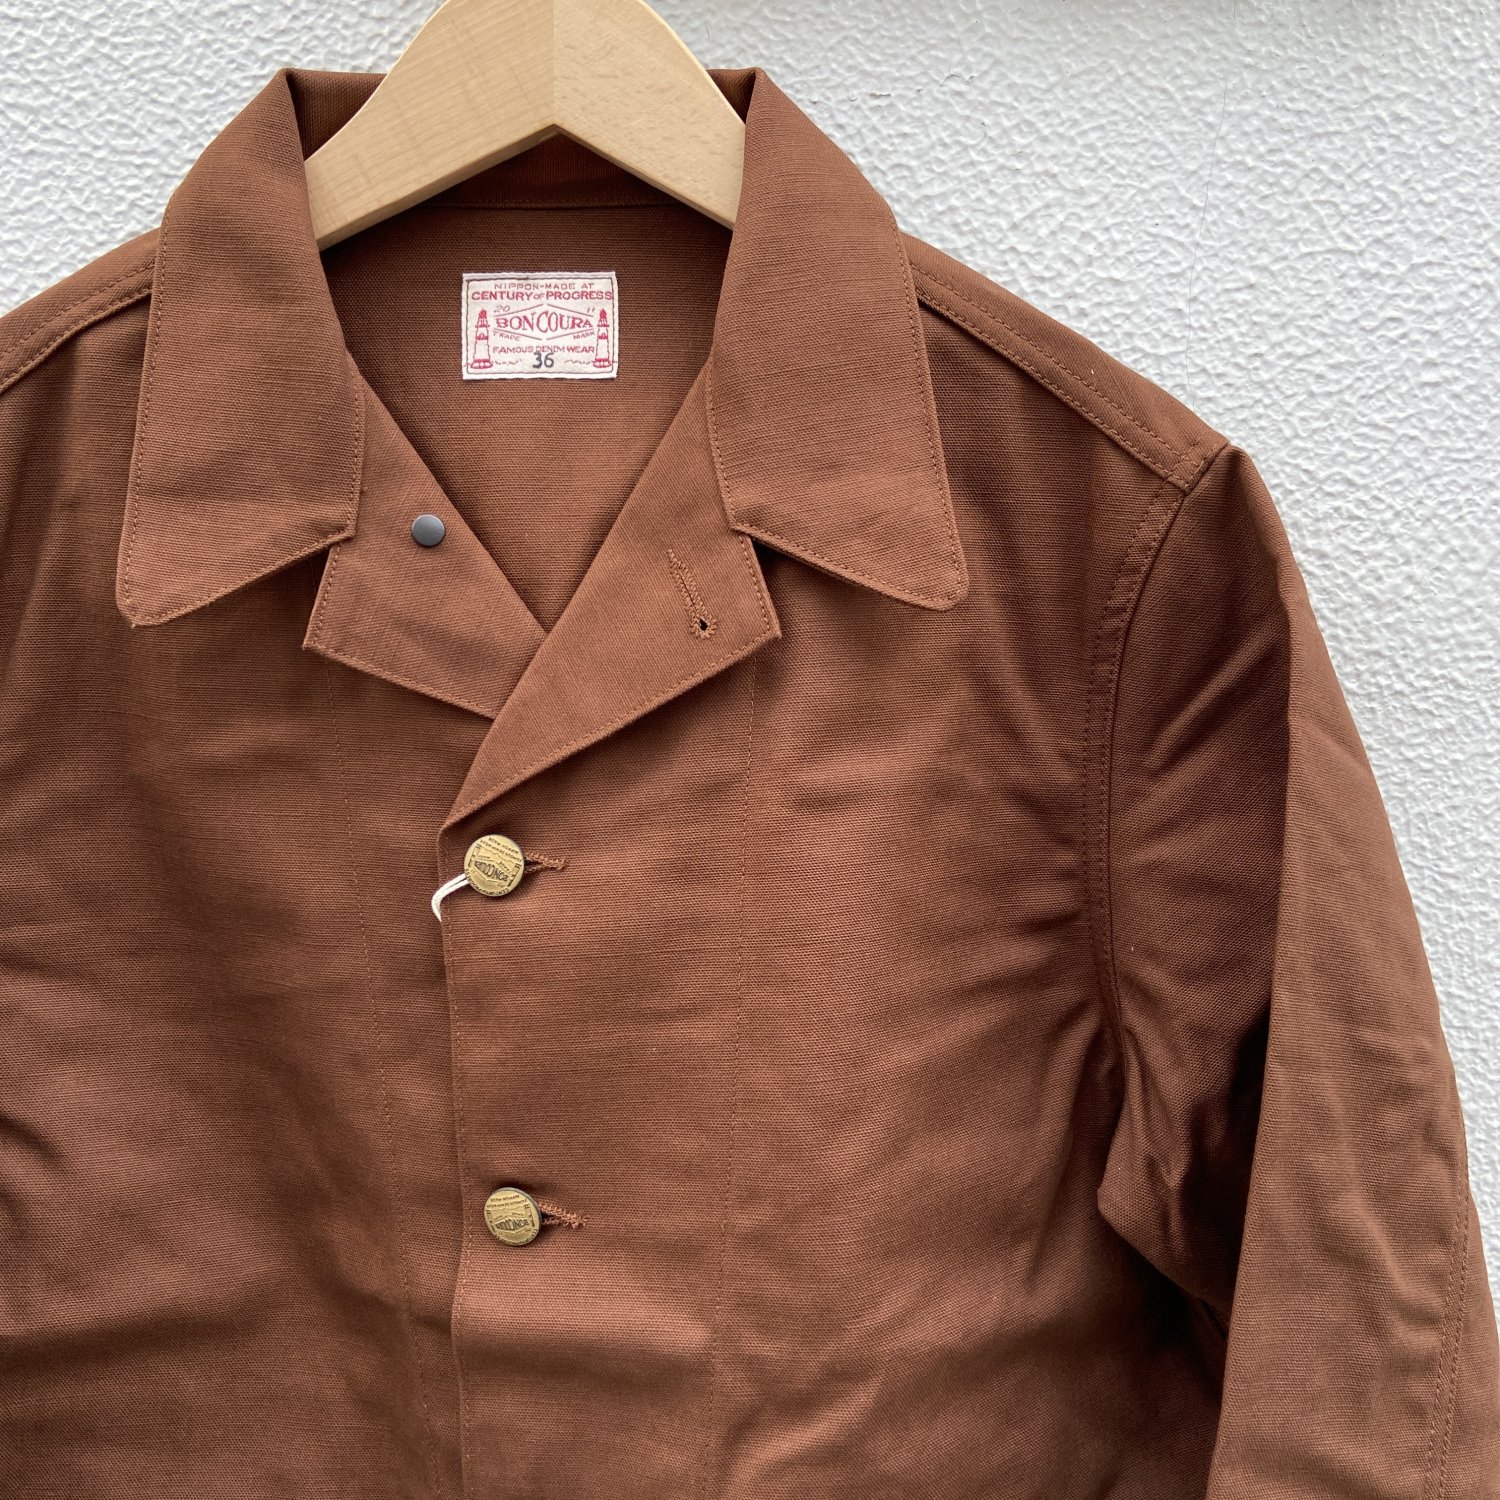 BONCOURA/ボンクラ Coverall U.S. Army Duck brown カバーオール